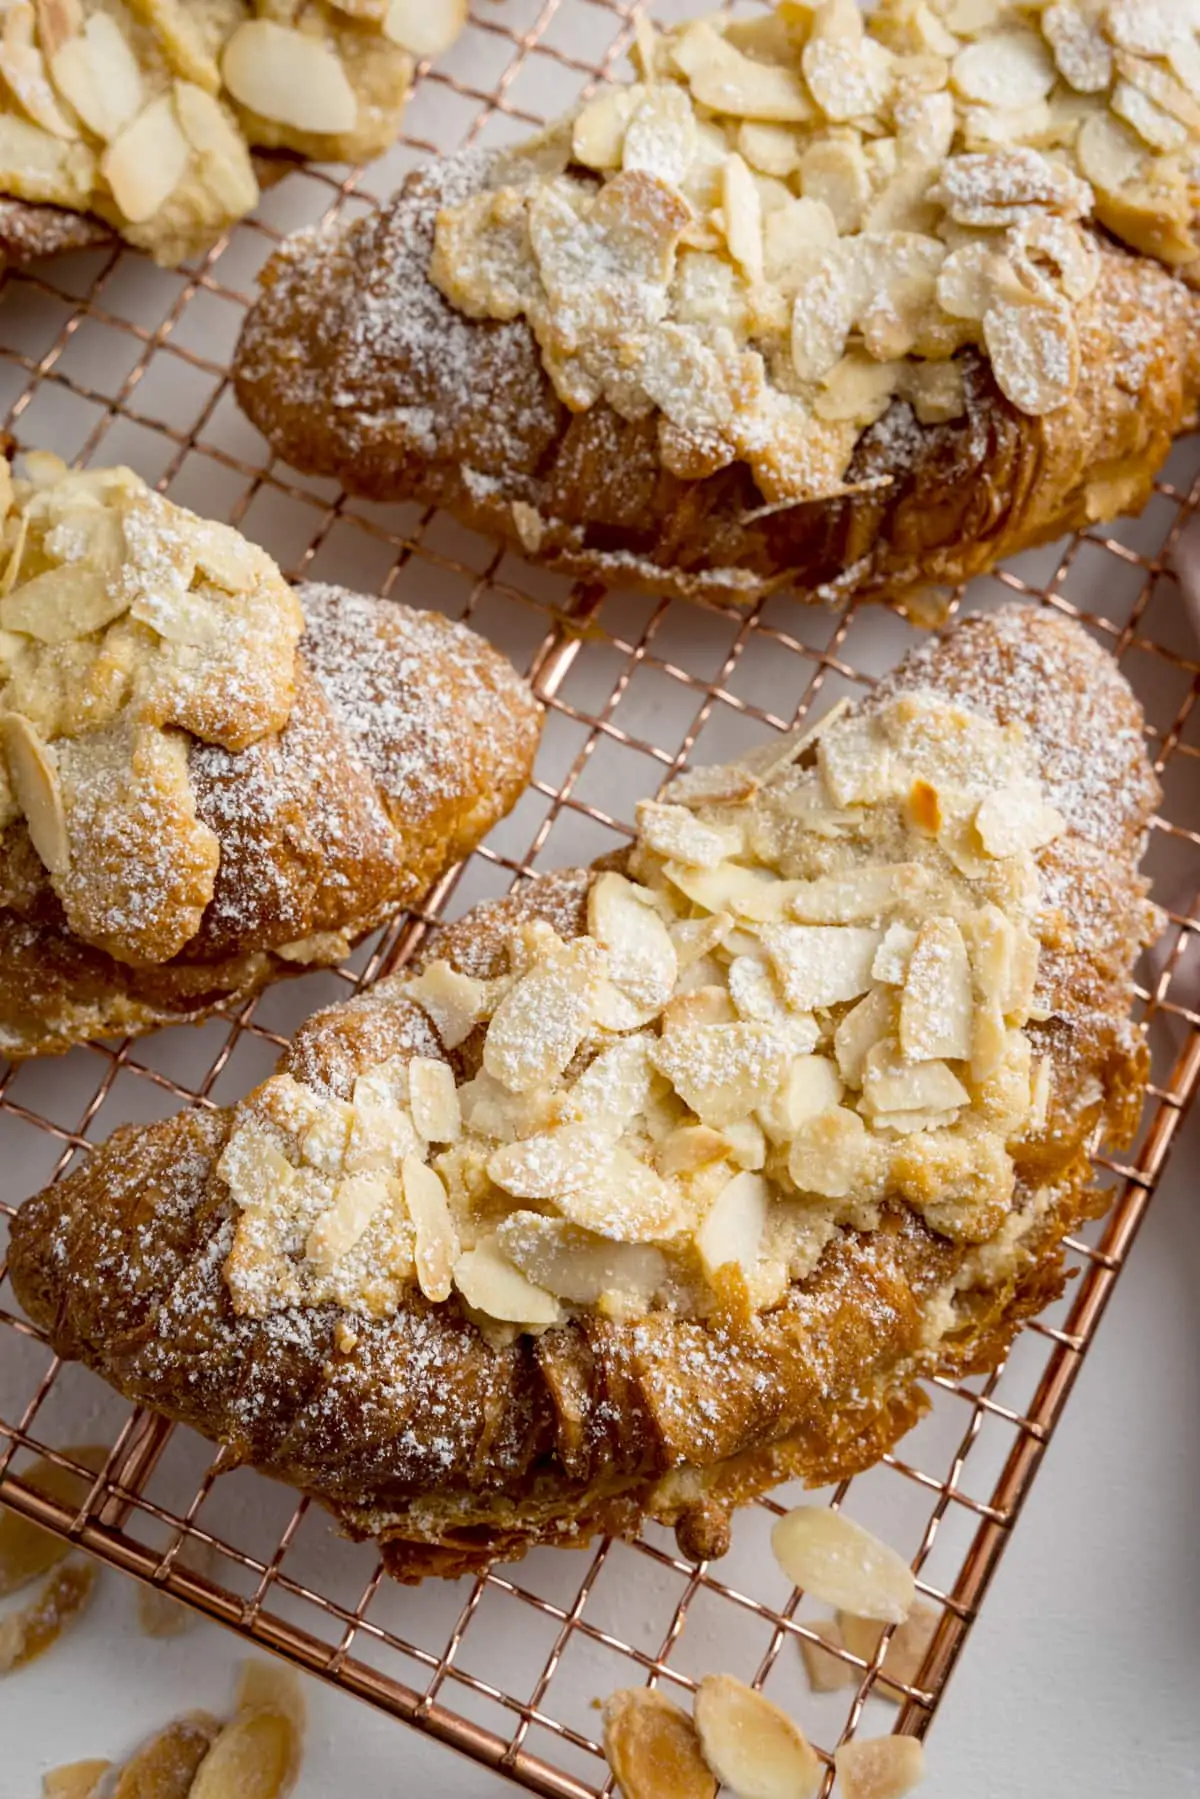 Kitchen Sanctuary on X: These Almond croissants are stuffed with